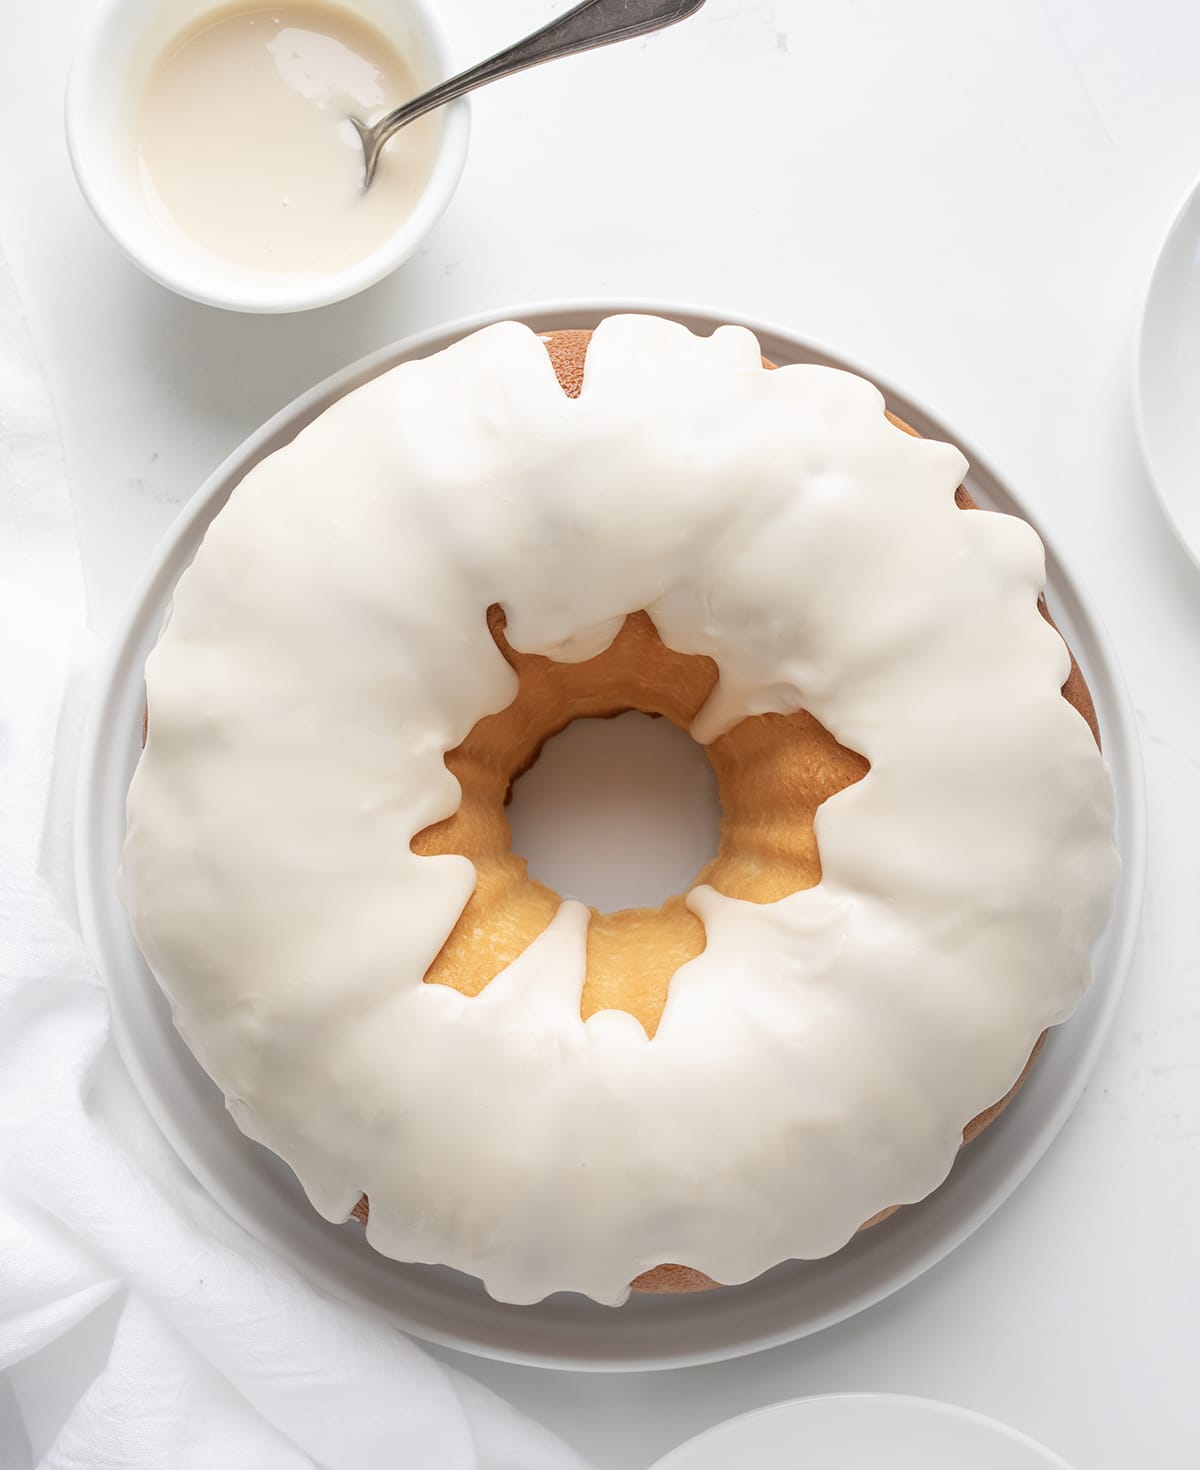 Whole Vanilla Bundt Cake on a White Cake Plate on a White Table from Overhead. 